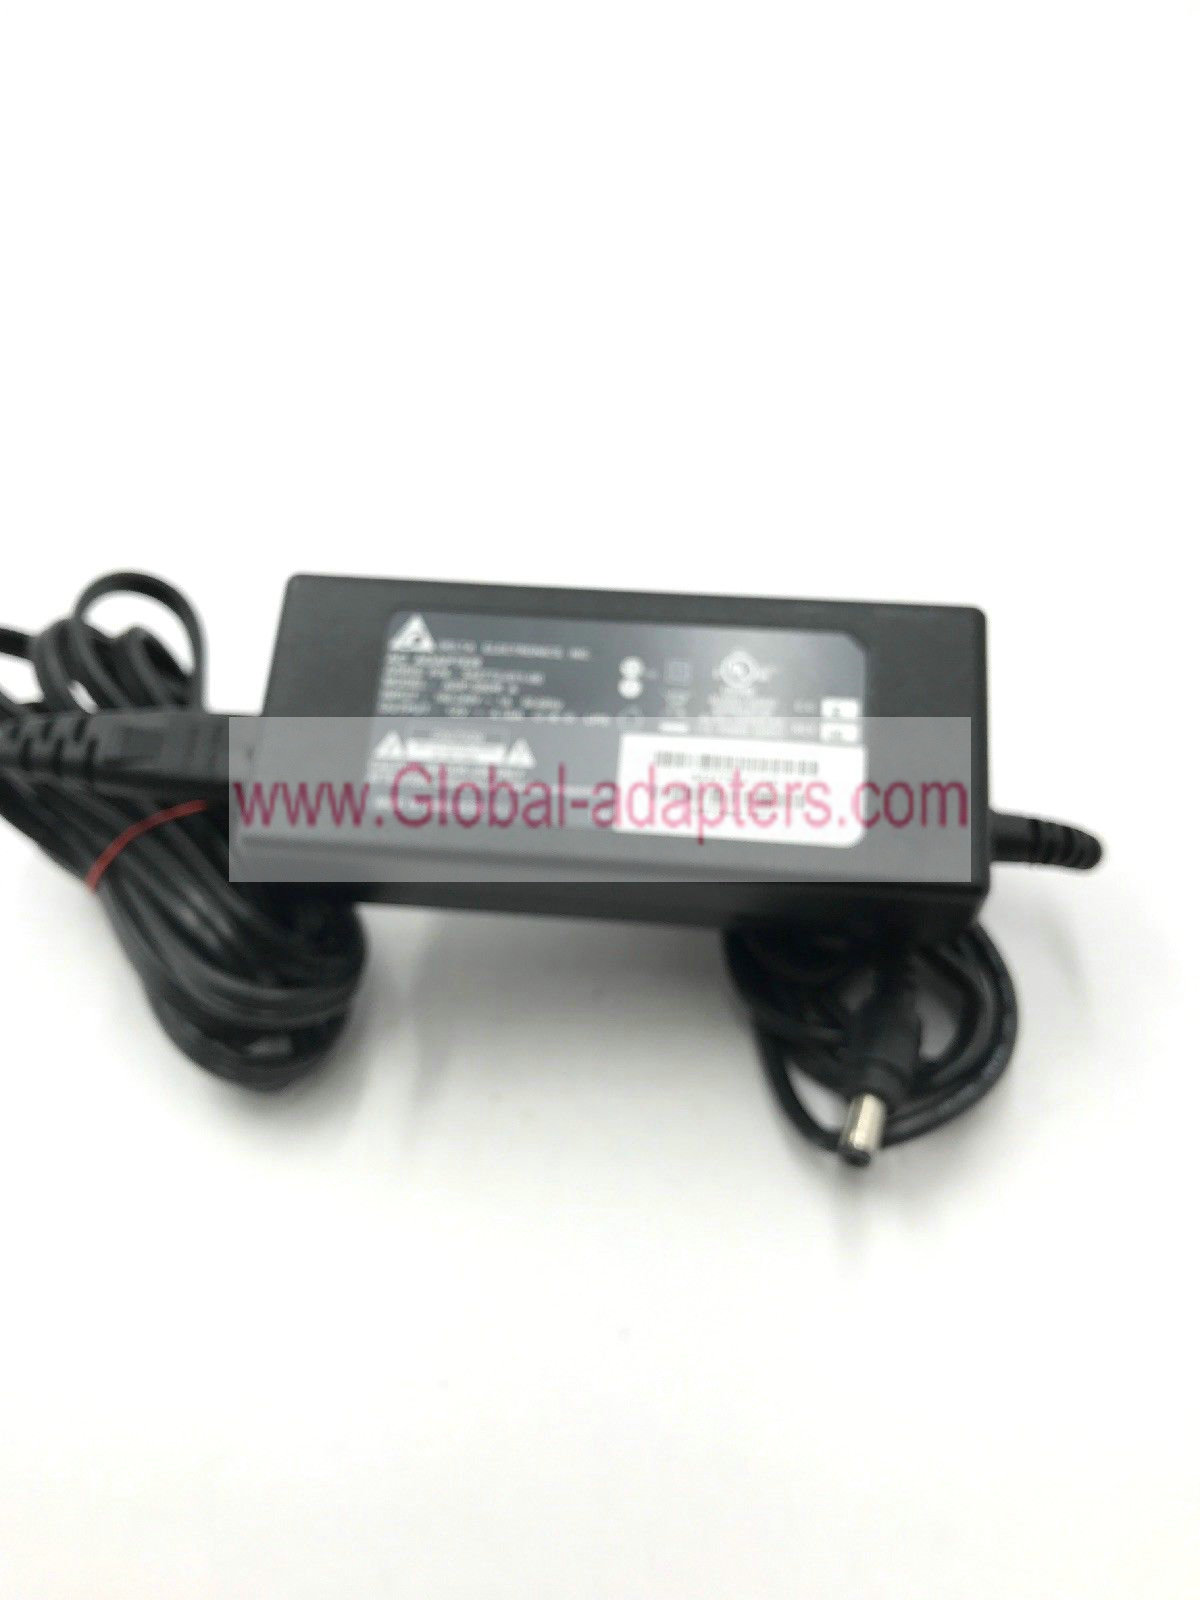 NEW Delta 542772-011-00 ADP-50DR A 12v 4.16a ac adapter power supply